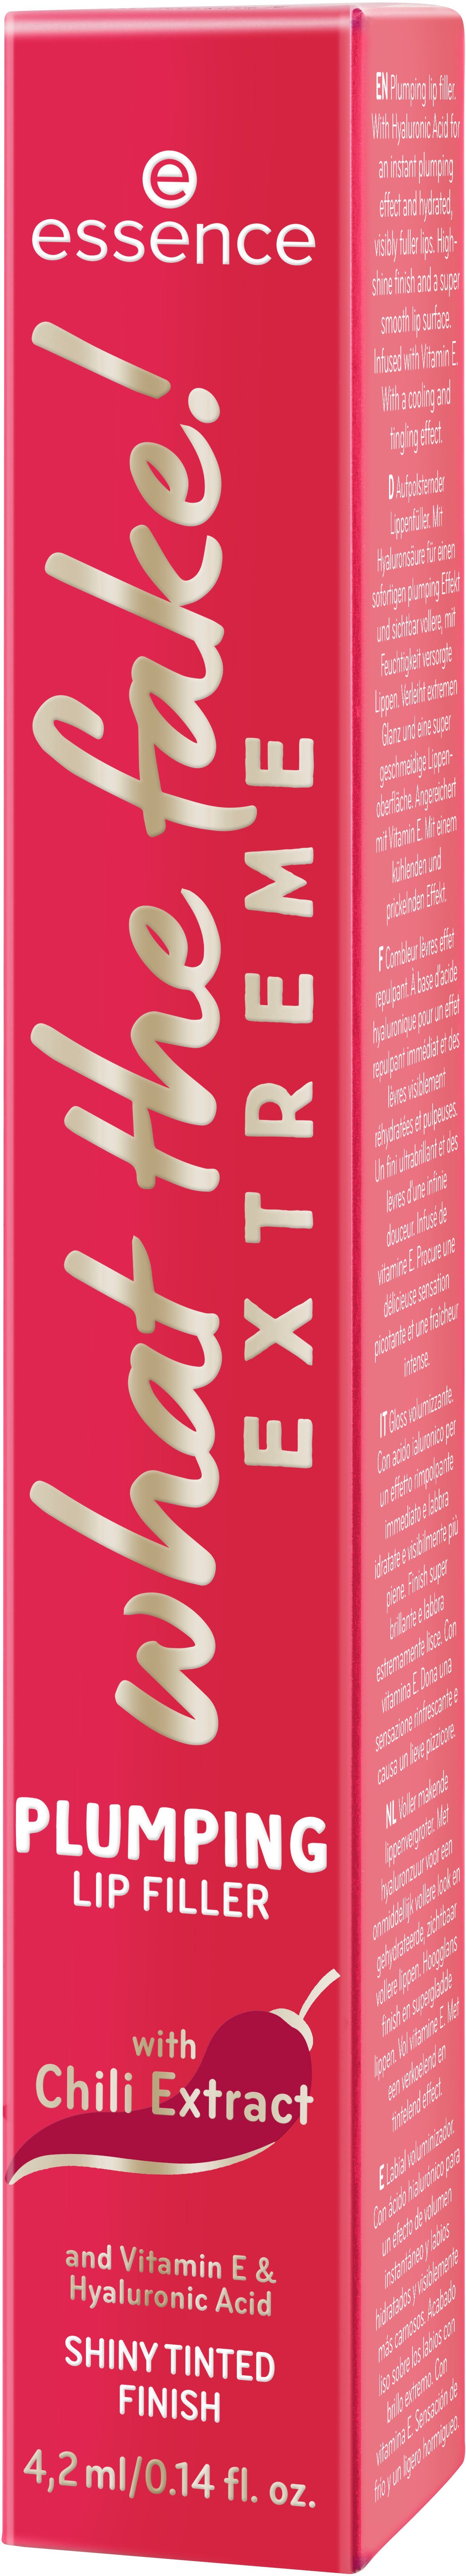 FILLER, fake! what Lip-Booster PLUMPING LIP 3-tlg. EXTREME the Essence